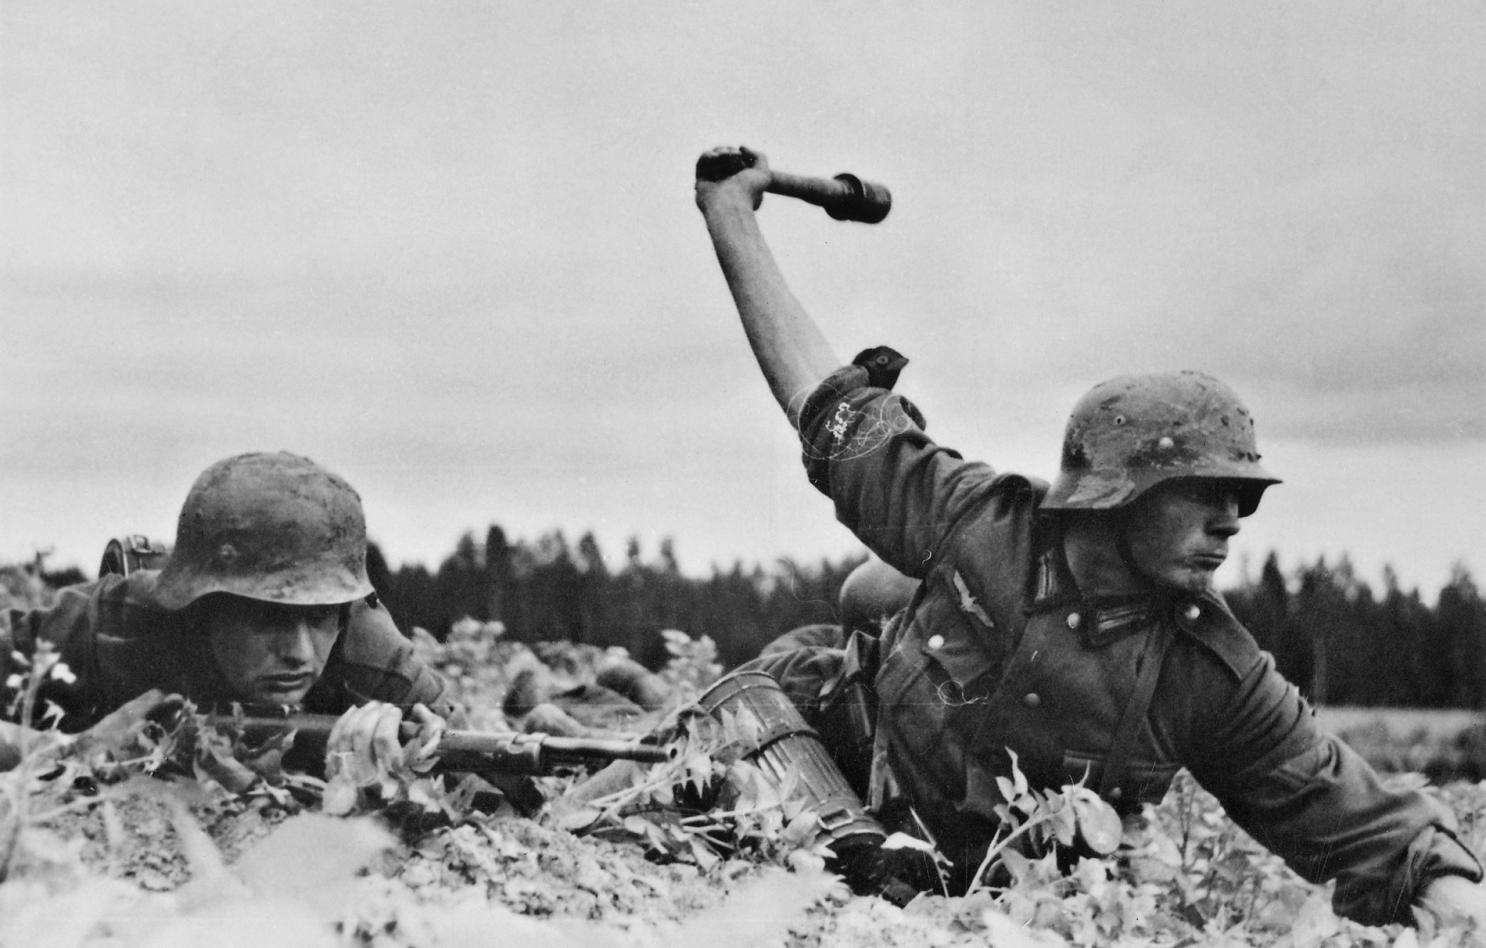 Can You Pass This Ultimate Quiz of “Two Truths and a Lie”? World War II